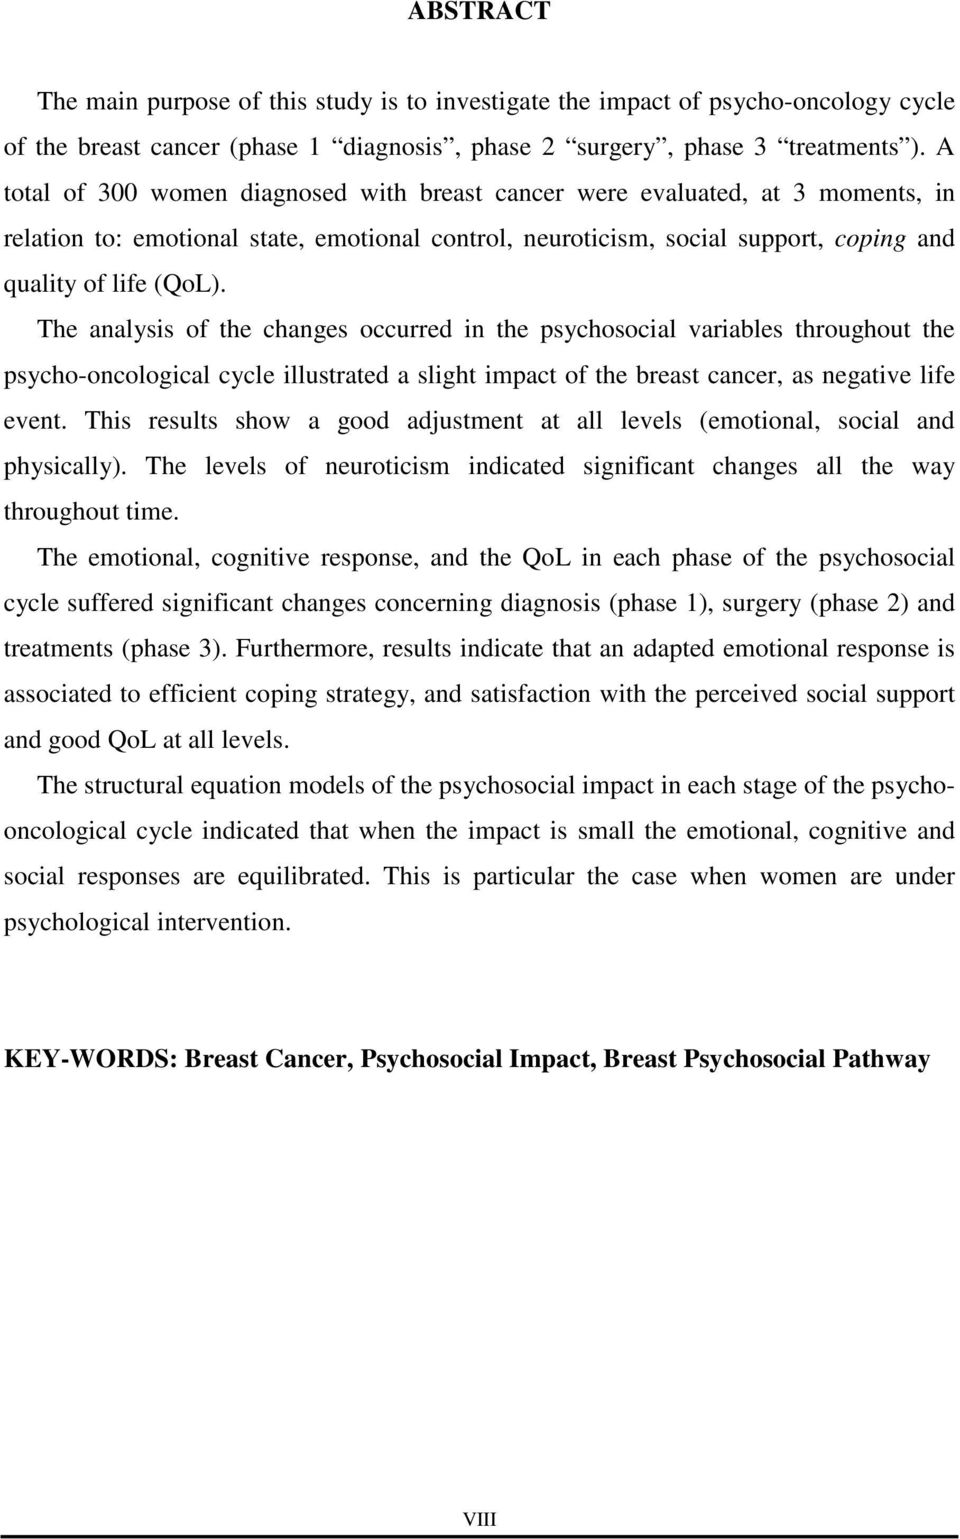 The analysis of the changes occurred in the psychosocial variables throughout the psycho-oncological cycle illustrated a slight impact of the breast cancer, as negative life event.